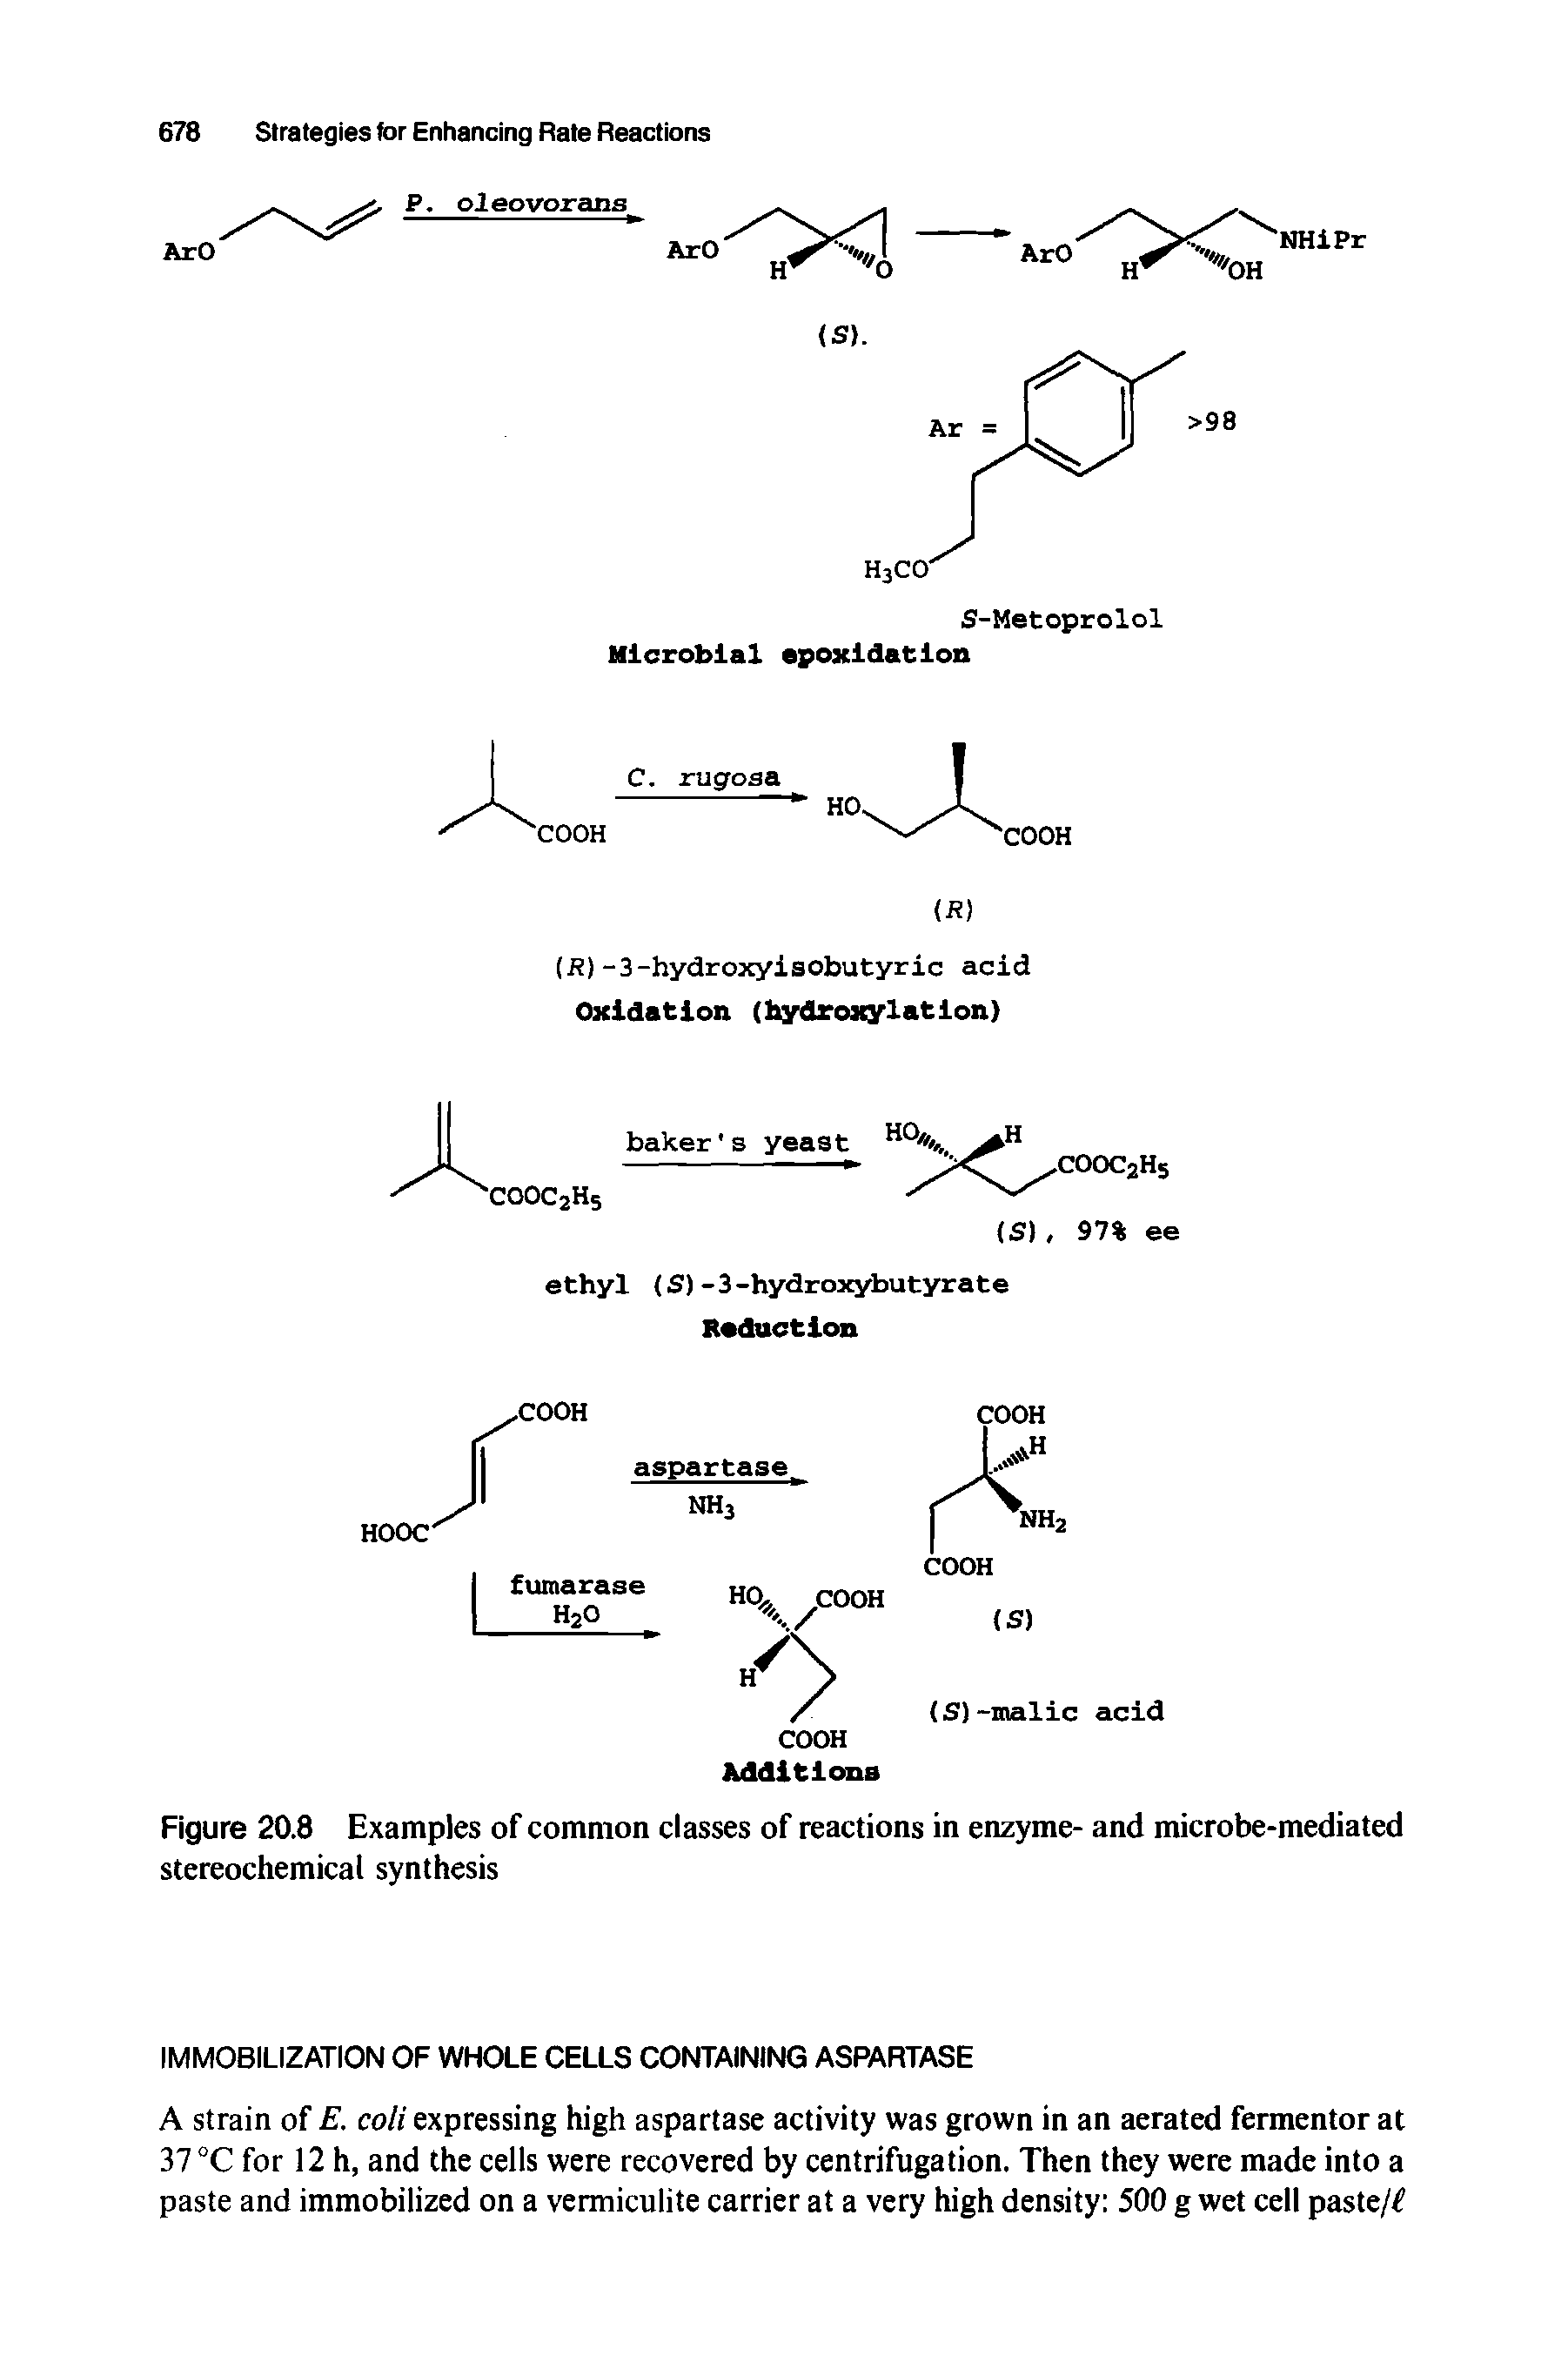 Figure 20.8 Examples of common classes of reactions in enzyme- and microbe-mediated stereochemical synthesis...